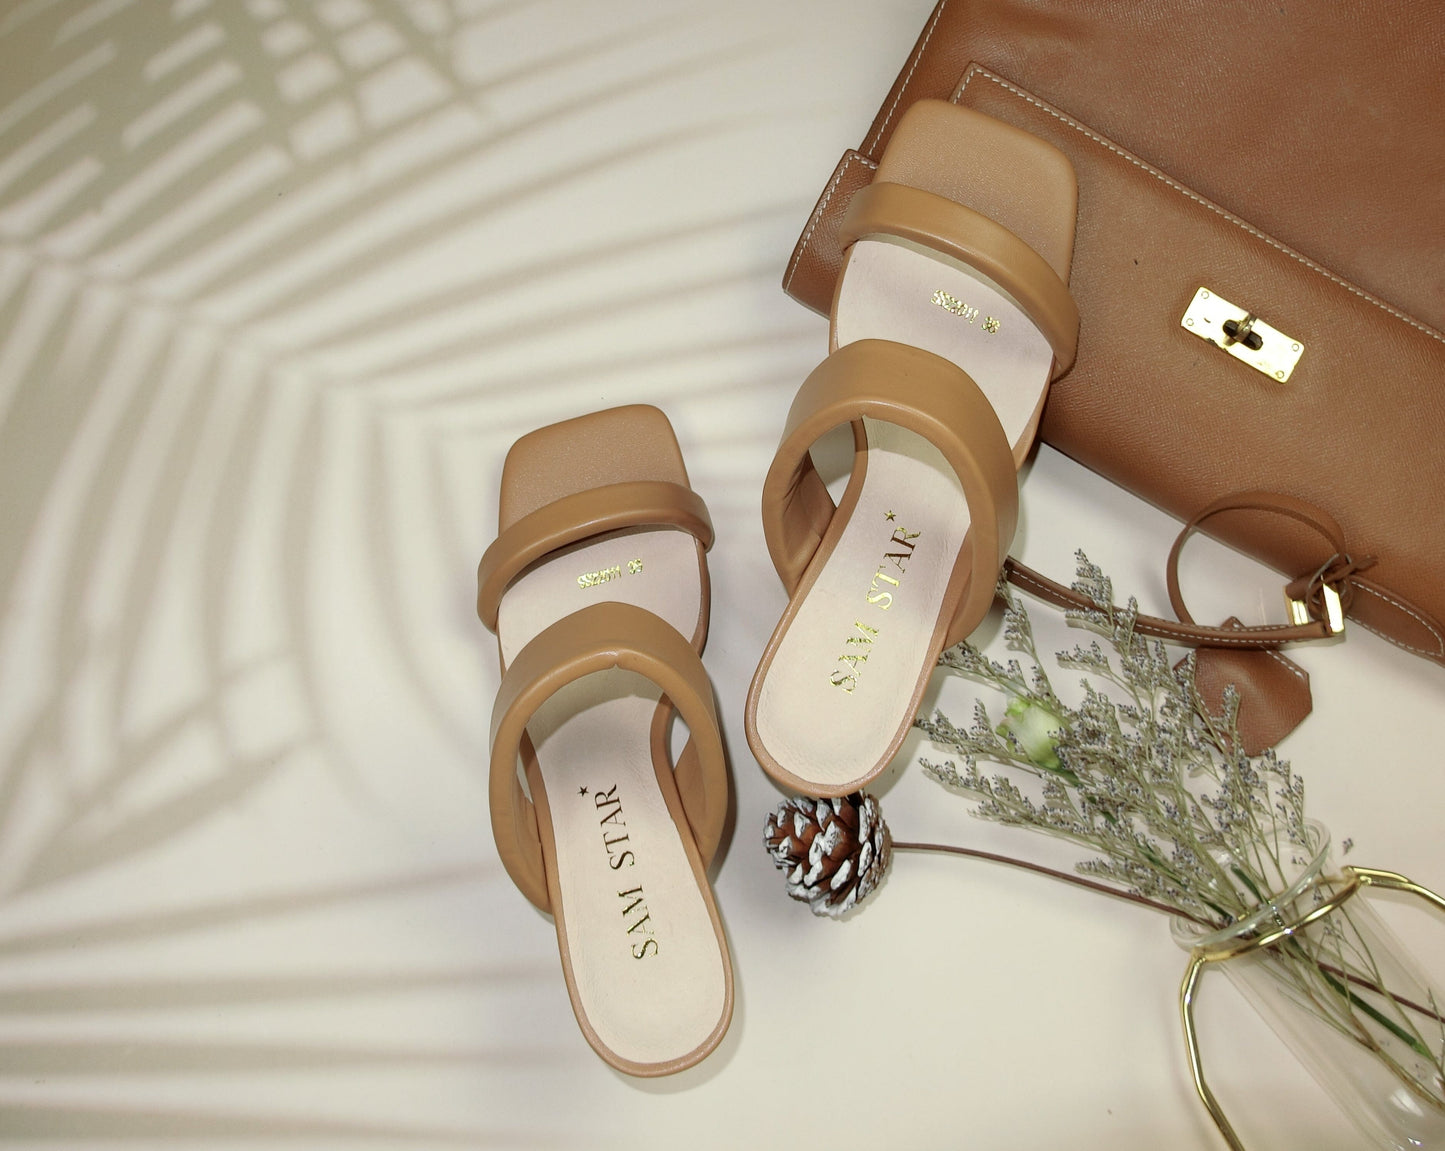 SS22011 Genuine leather puffy straps sandals in Tan sandals Sam Star Shoes Tan 38/5 